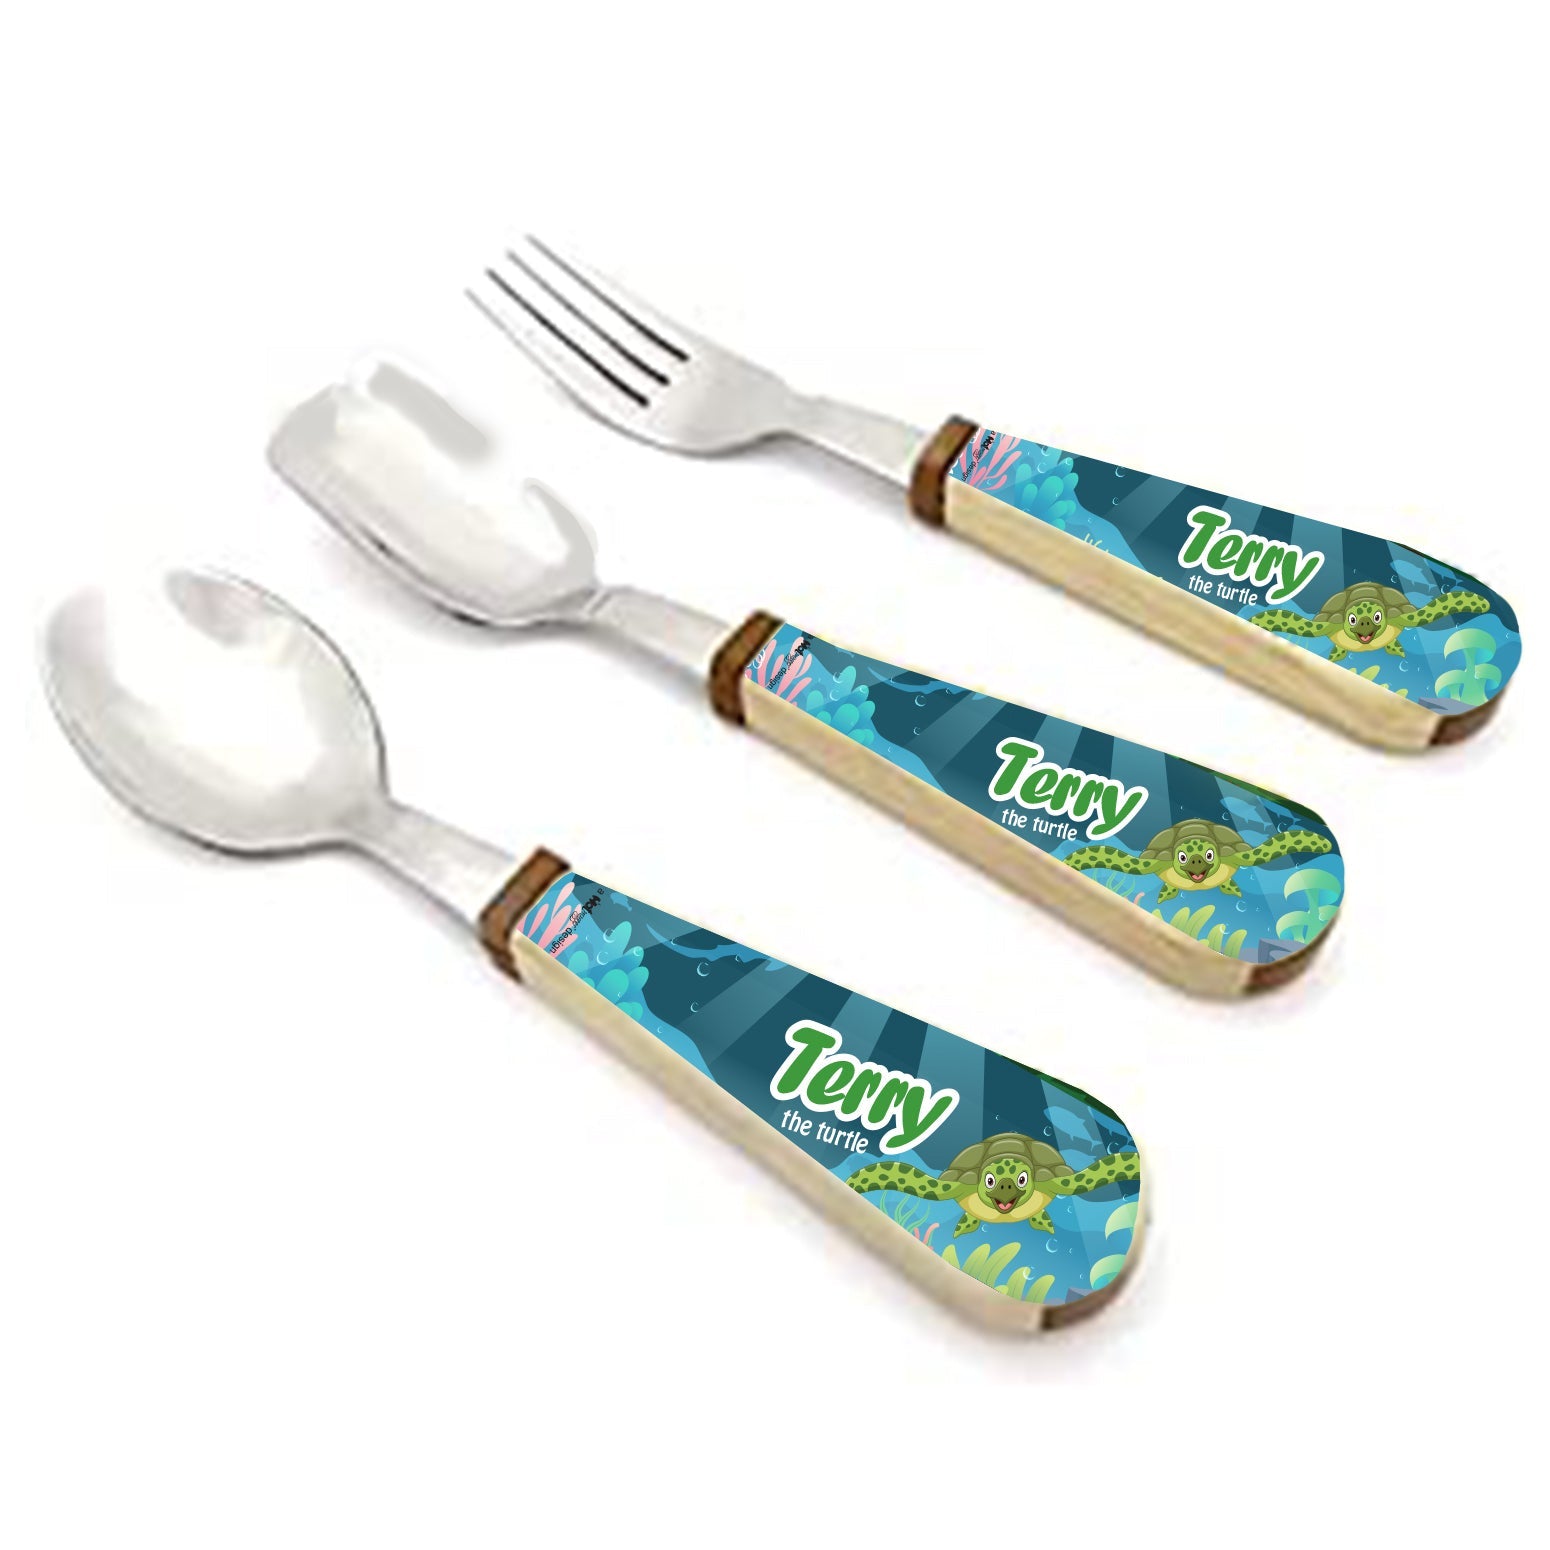 Cutlery Set - Terry the Turtle (Spoon + Ice Cream Spoon + Fork) Set Of 3